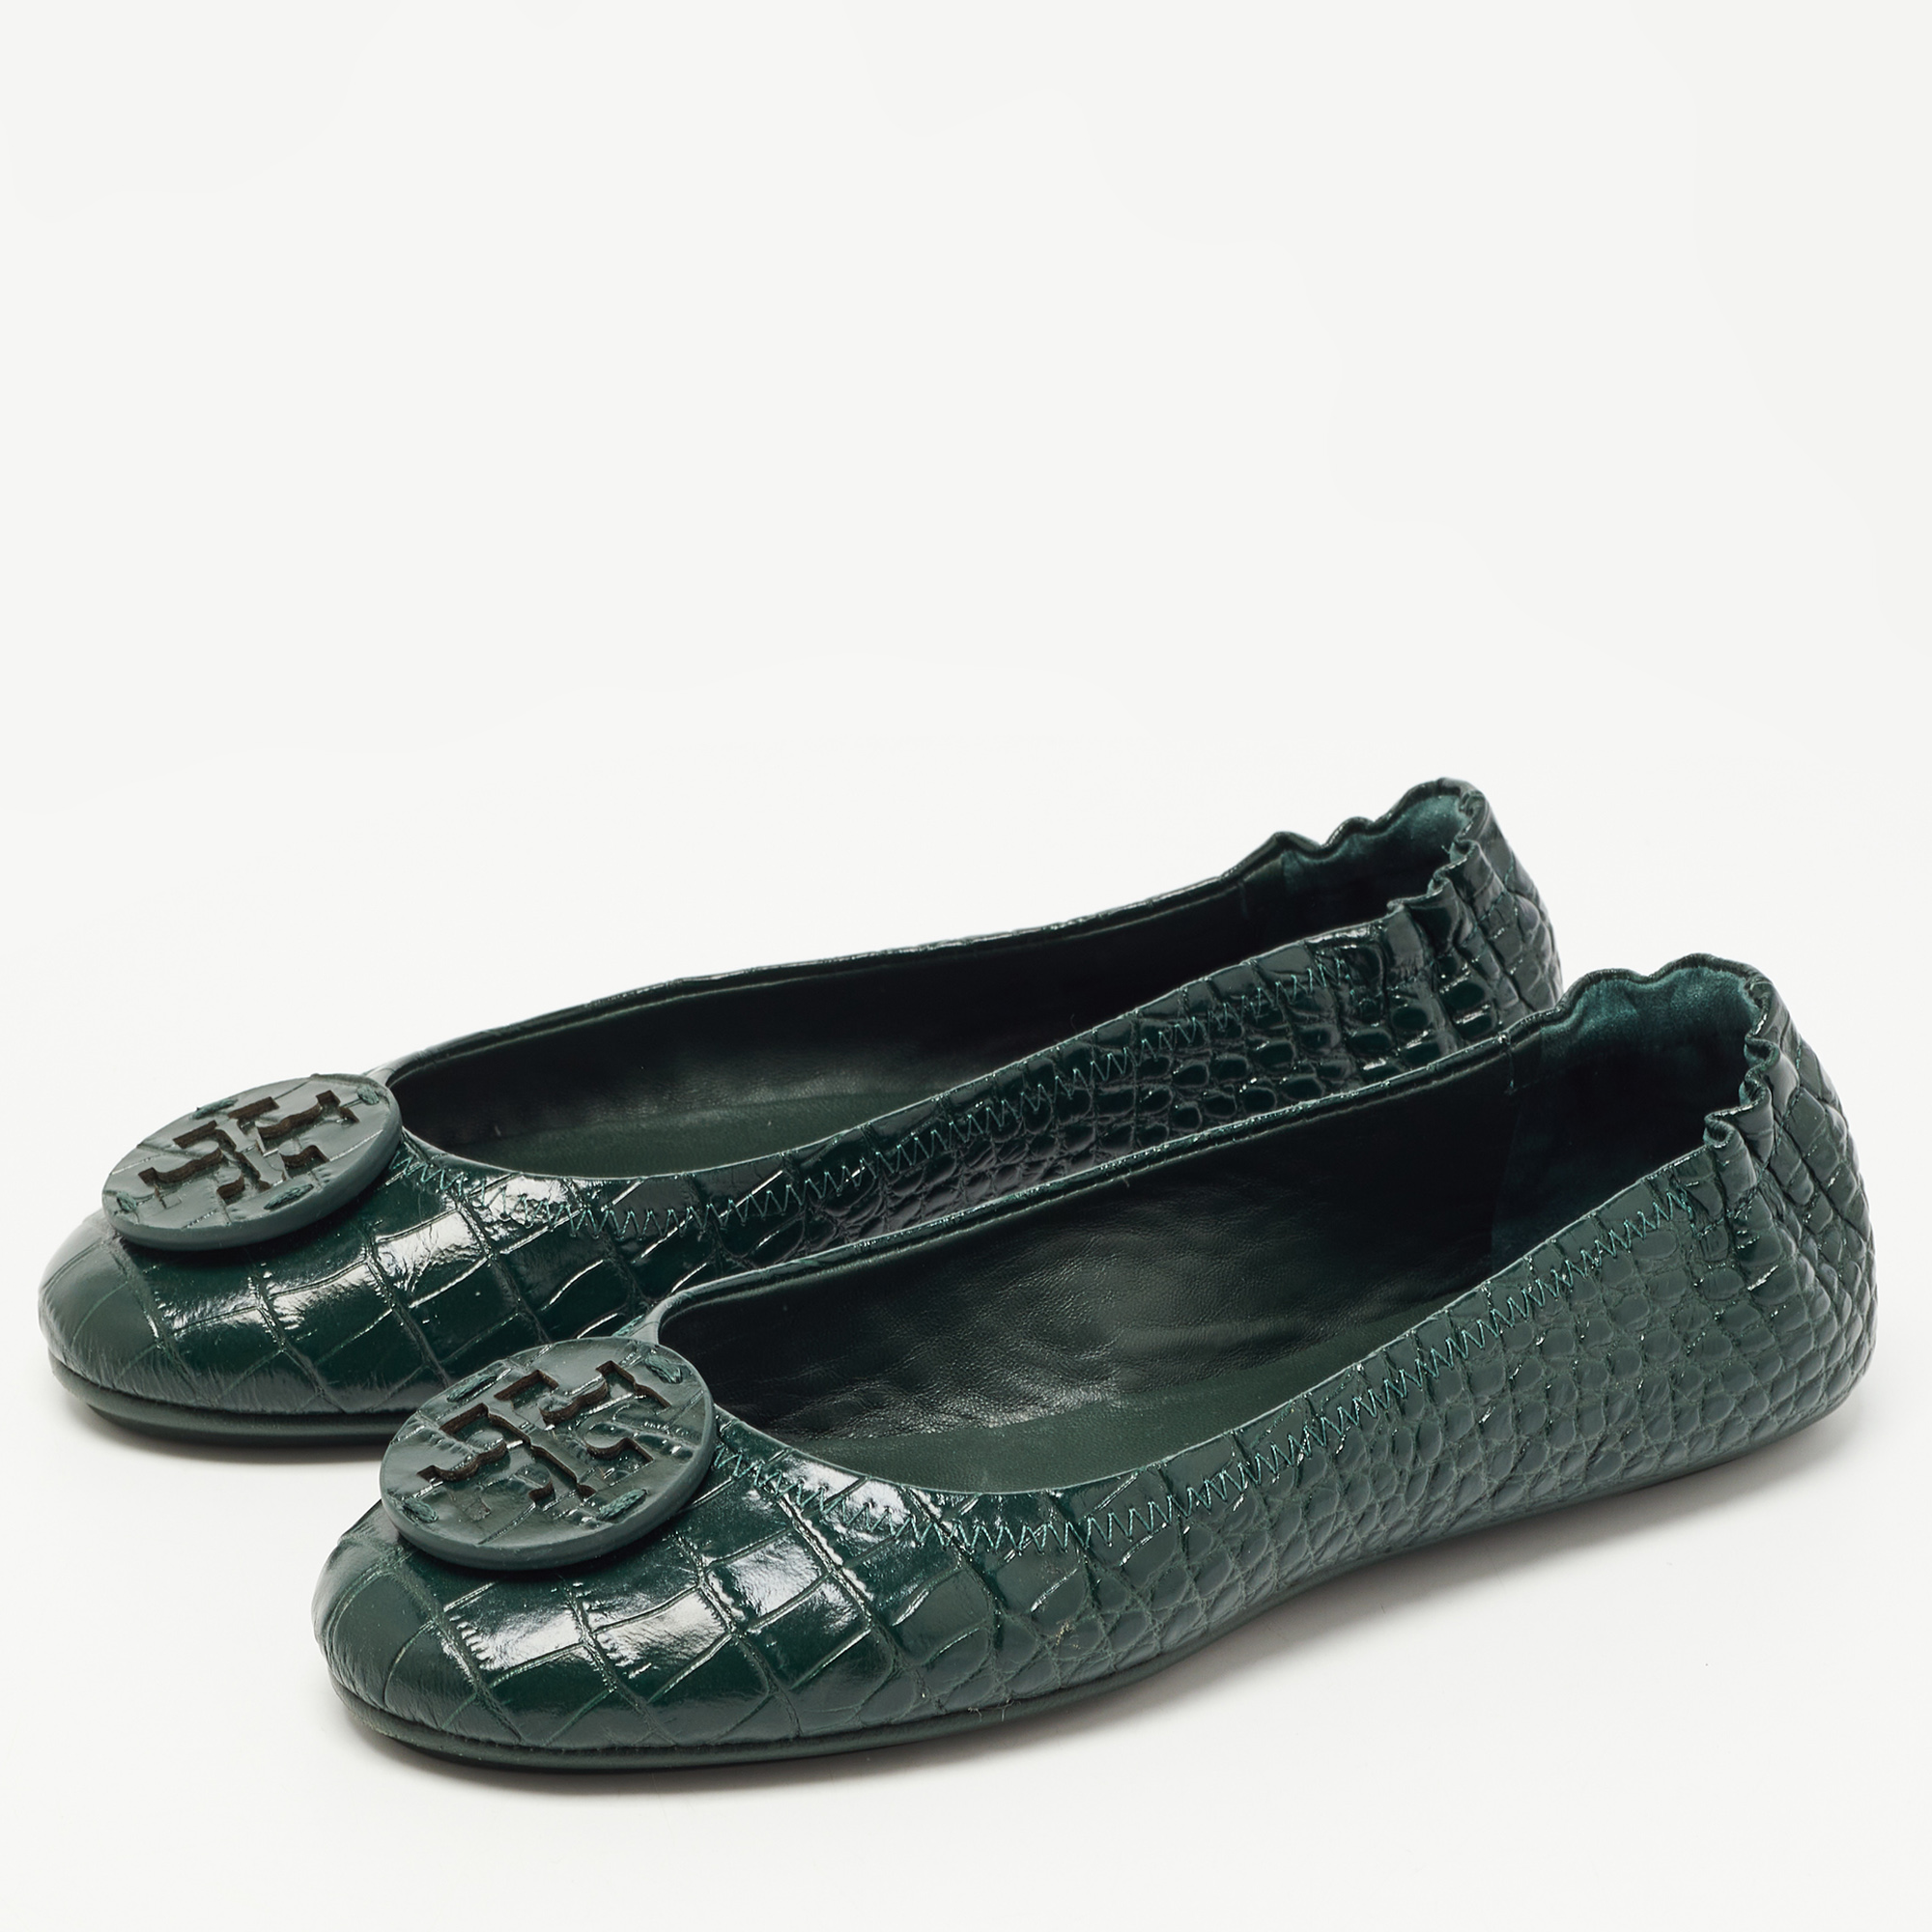 

Tory Burch Green Croc Embossed Leather Minnie Travel Ballet Flats Size